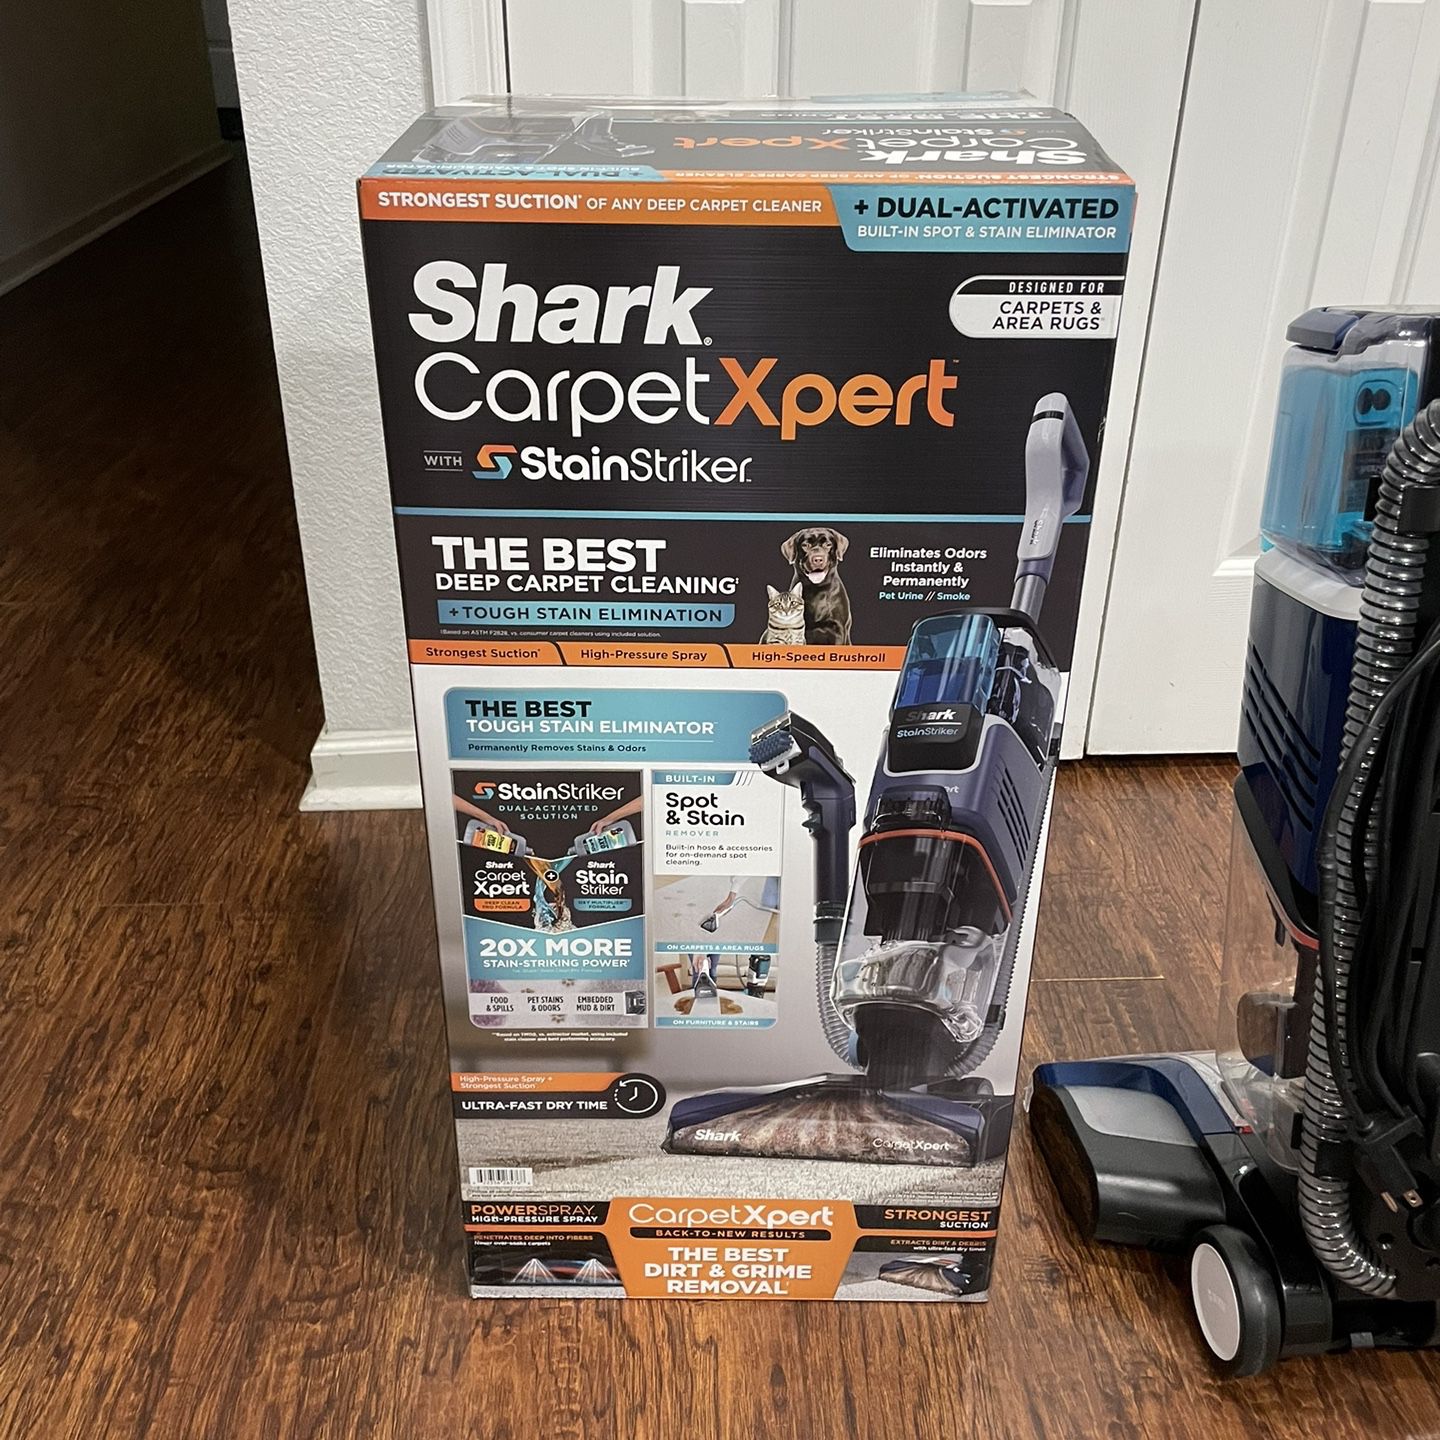 Shark CarpetXpert with StainStriker, Upright Carpet & Upholstery Cleaner, Built-in Spot & Stain Eliminator, Deep Cleaning & Tough Stain Removal, Carpe